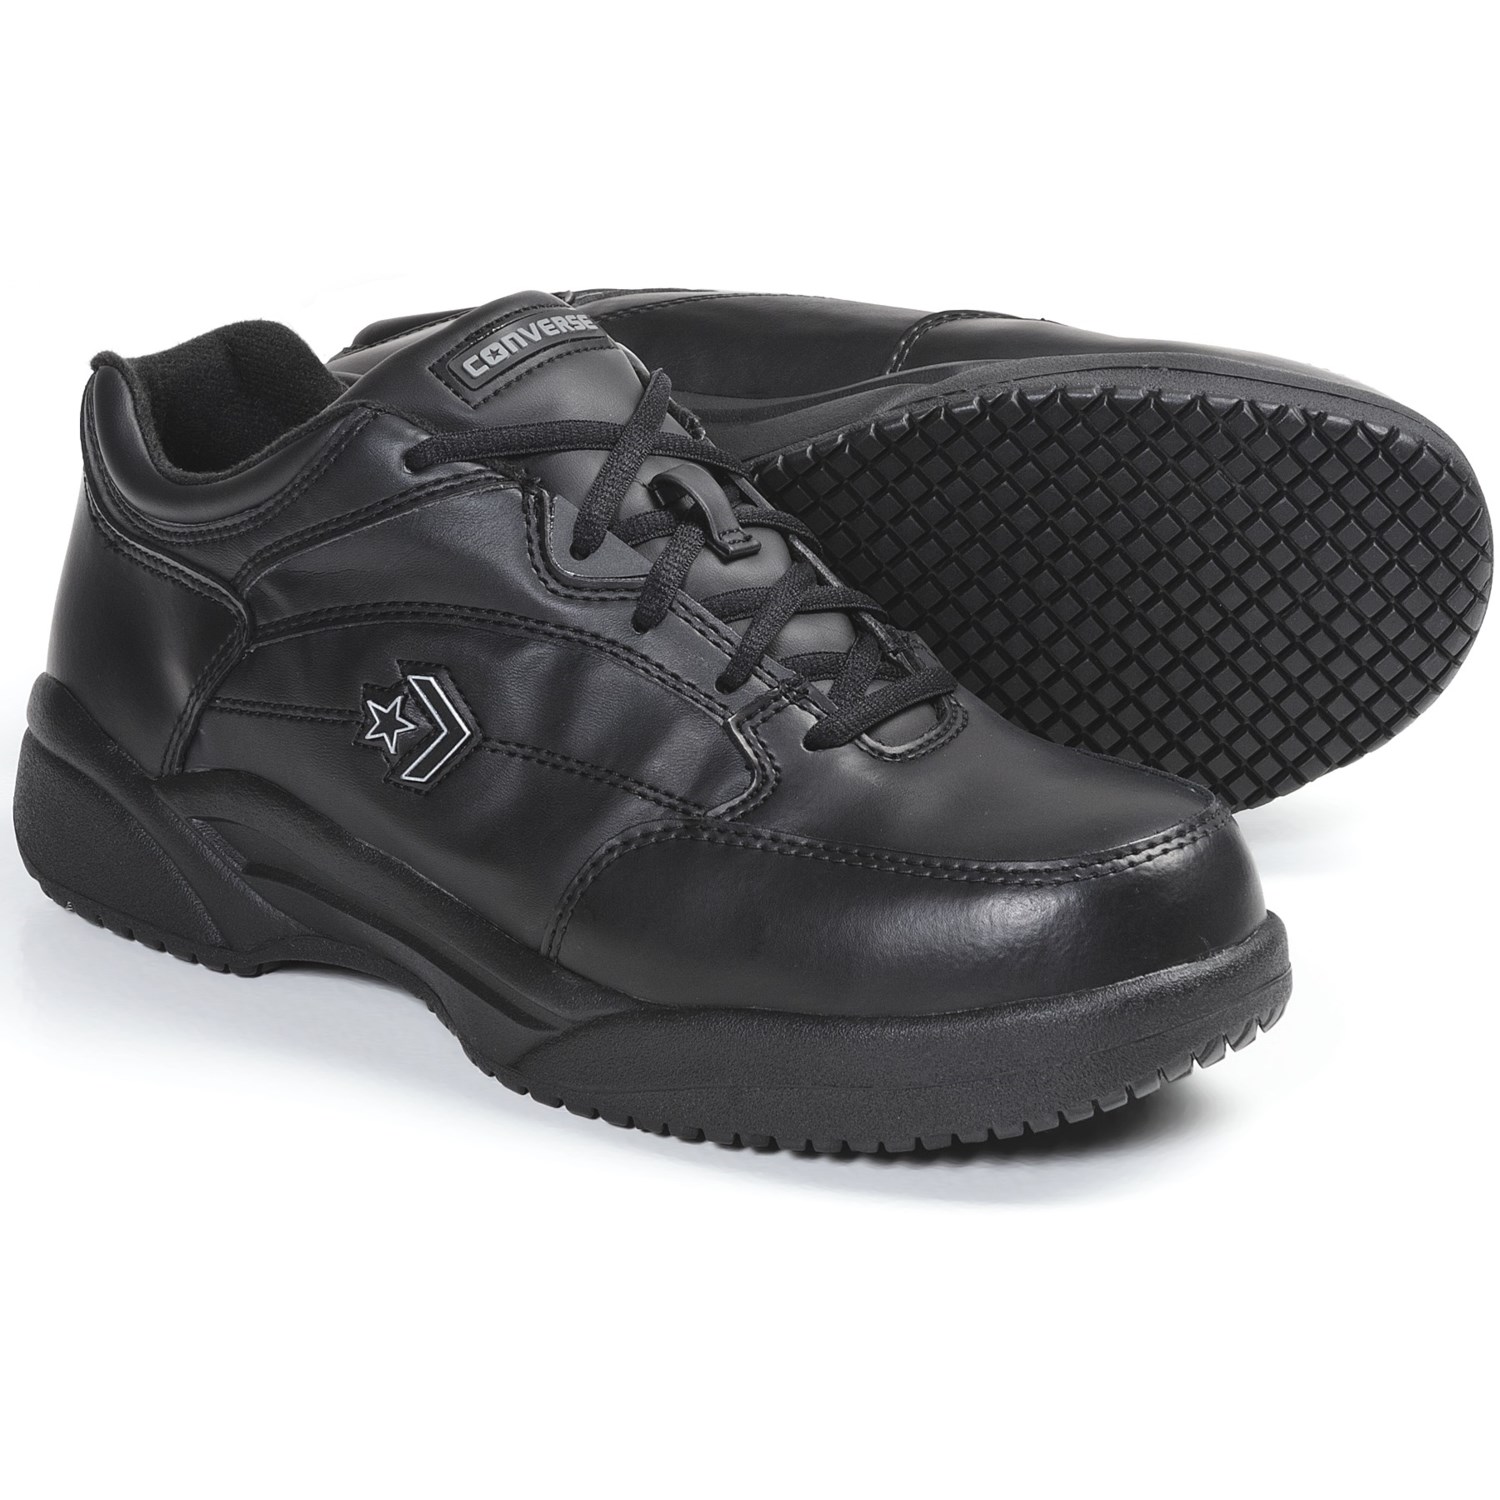 Converse Steel Toe Oxford Work Shoes (For Men) - Save 30%